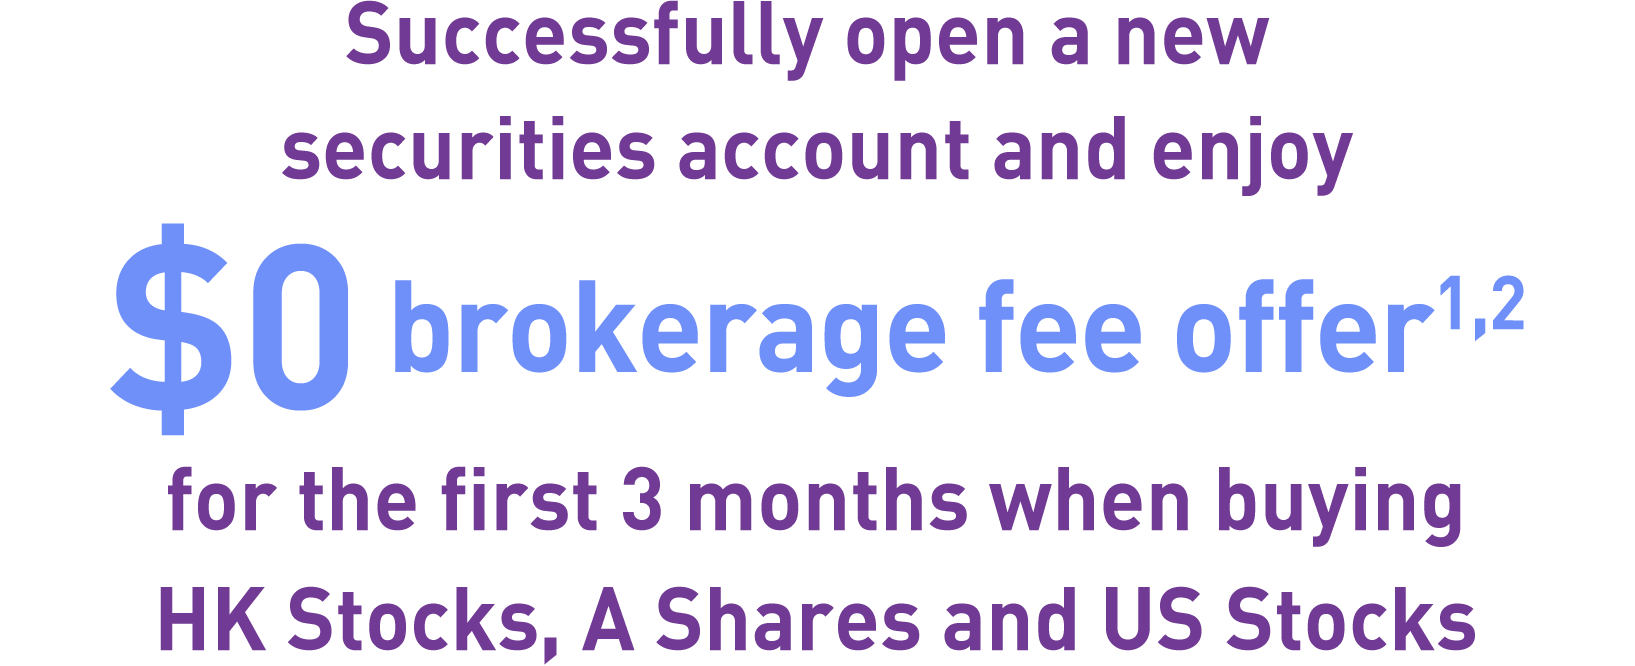 Successfully open a new securities account and enjoy $0 brokerage fee offer for the first 3 months when buying or selling HK Stocks, A Shares and US Stocks.<br>Complete one designated transaction and receive HK$50 Pacific Coffee coupon.